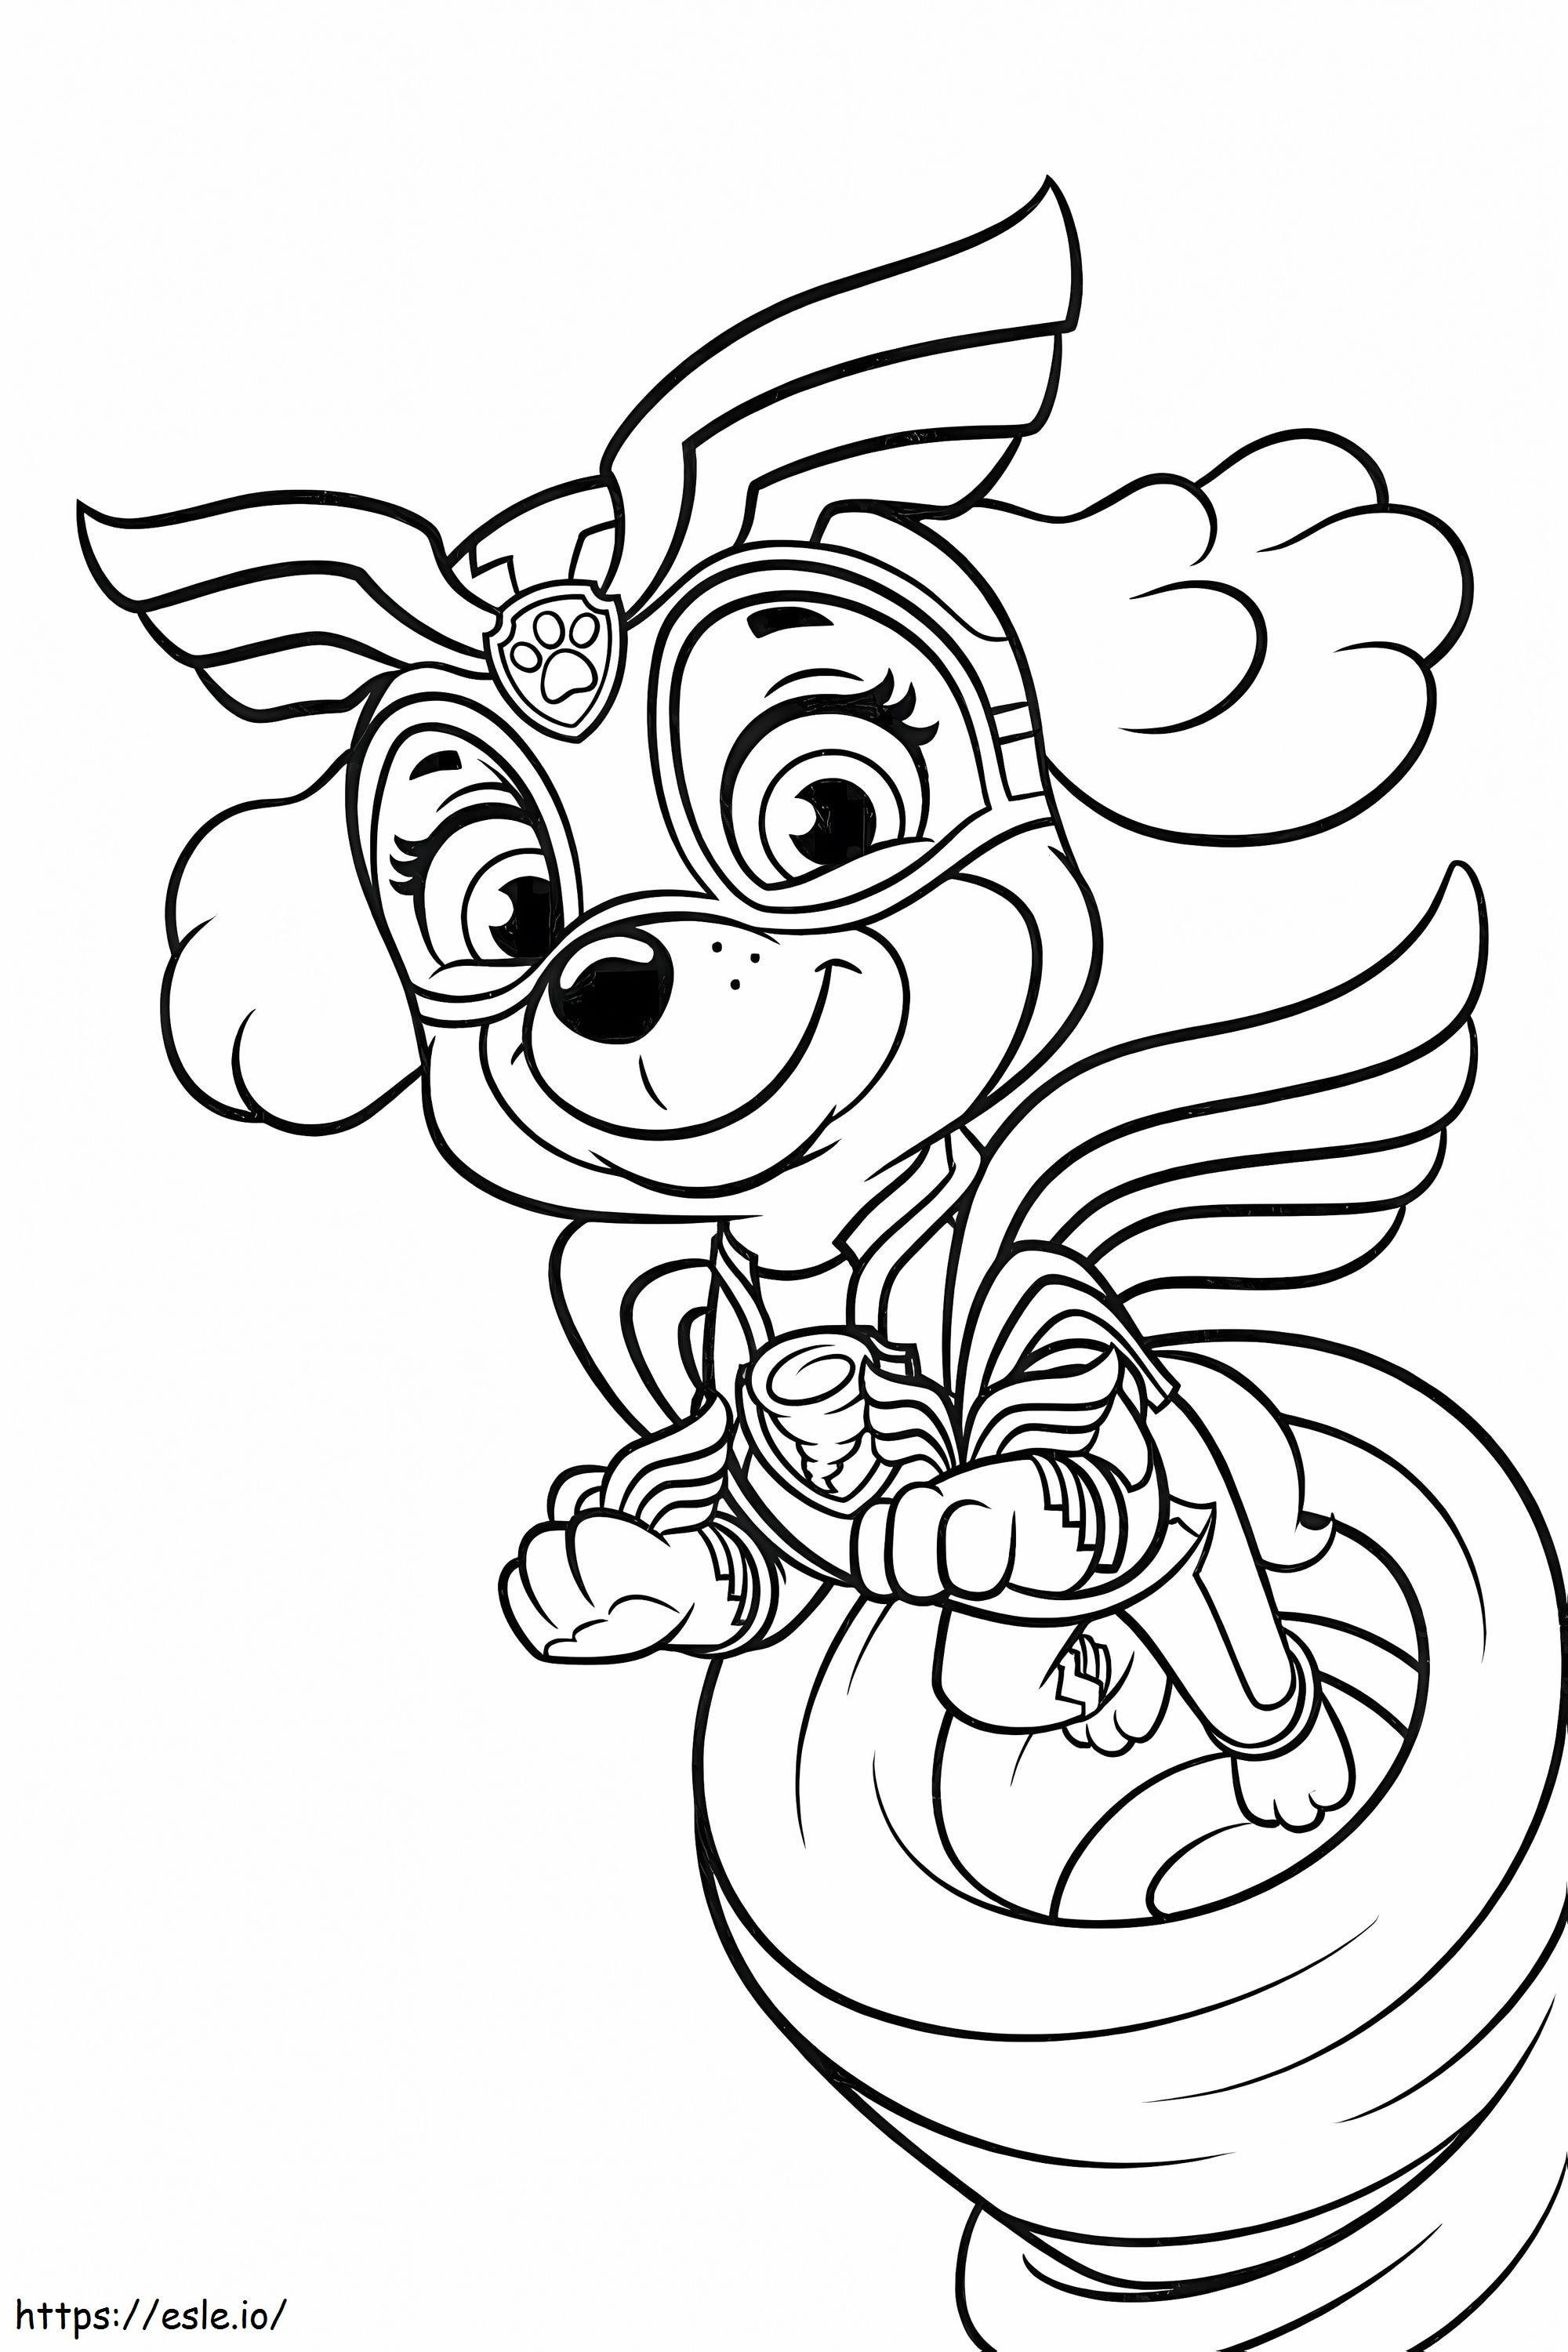 Skye From Paw Patrol 1 coloring page